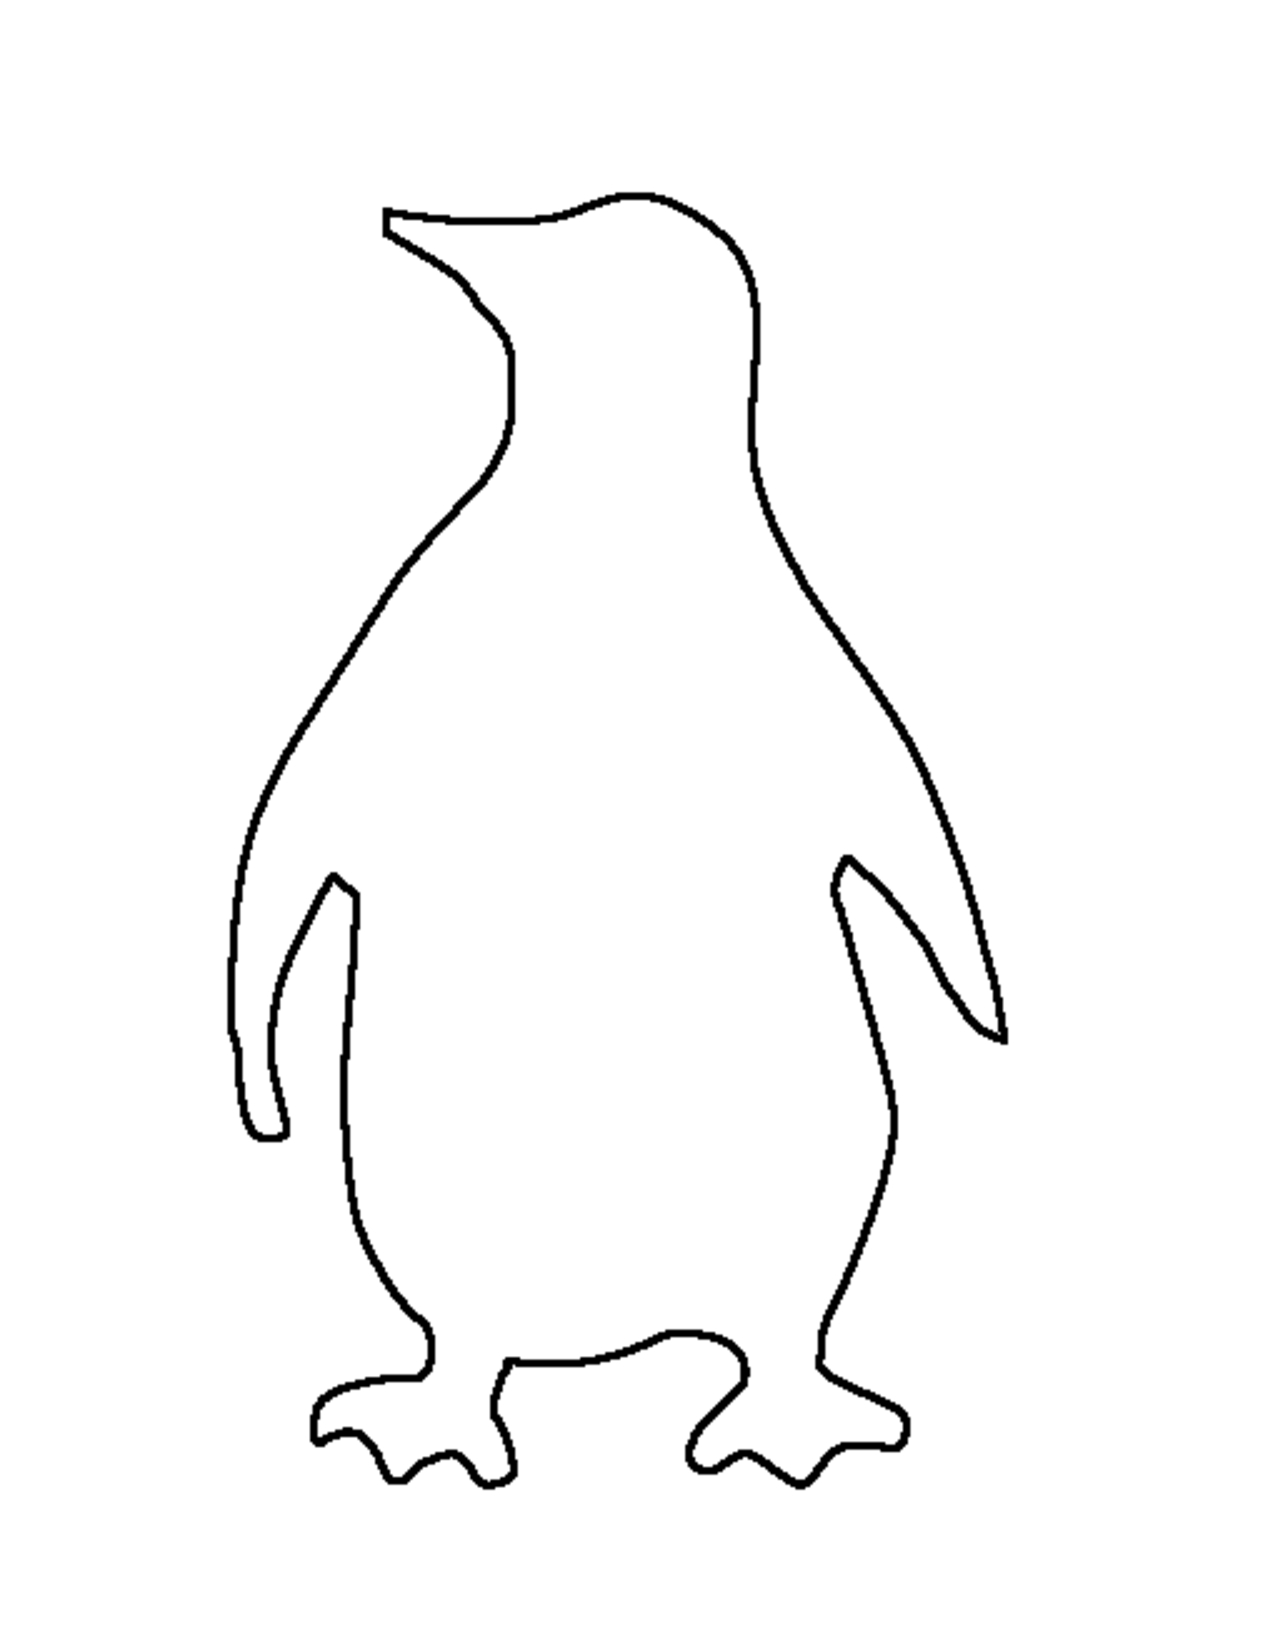 Perfect Pattern For Penguin Camo Activity: White And Black Throughout Blank Elephant Template